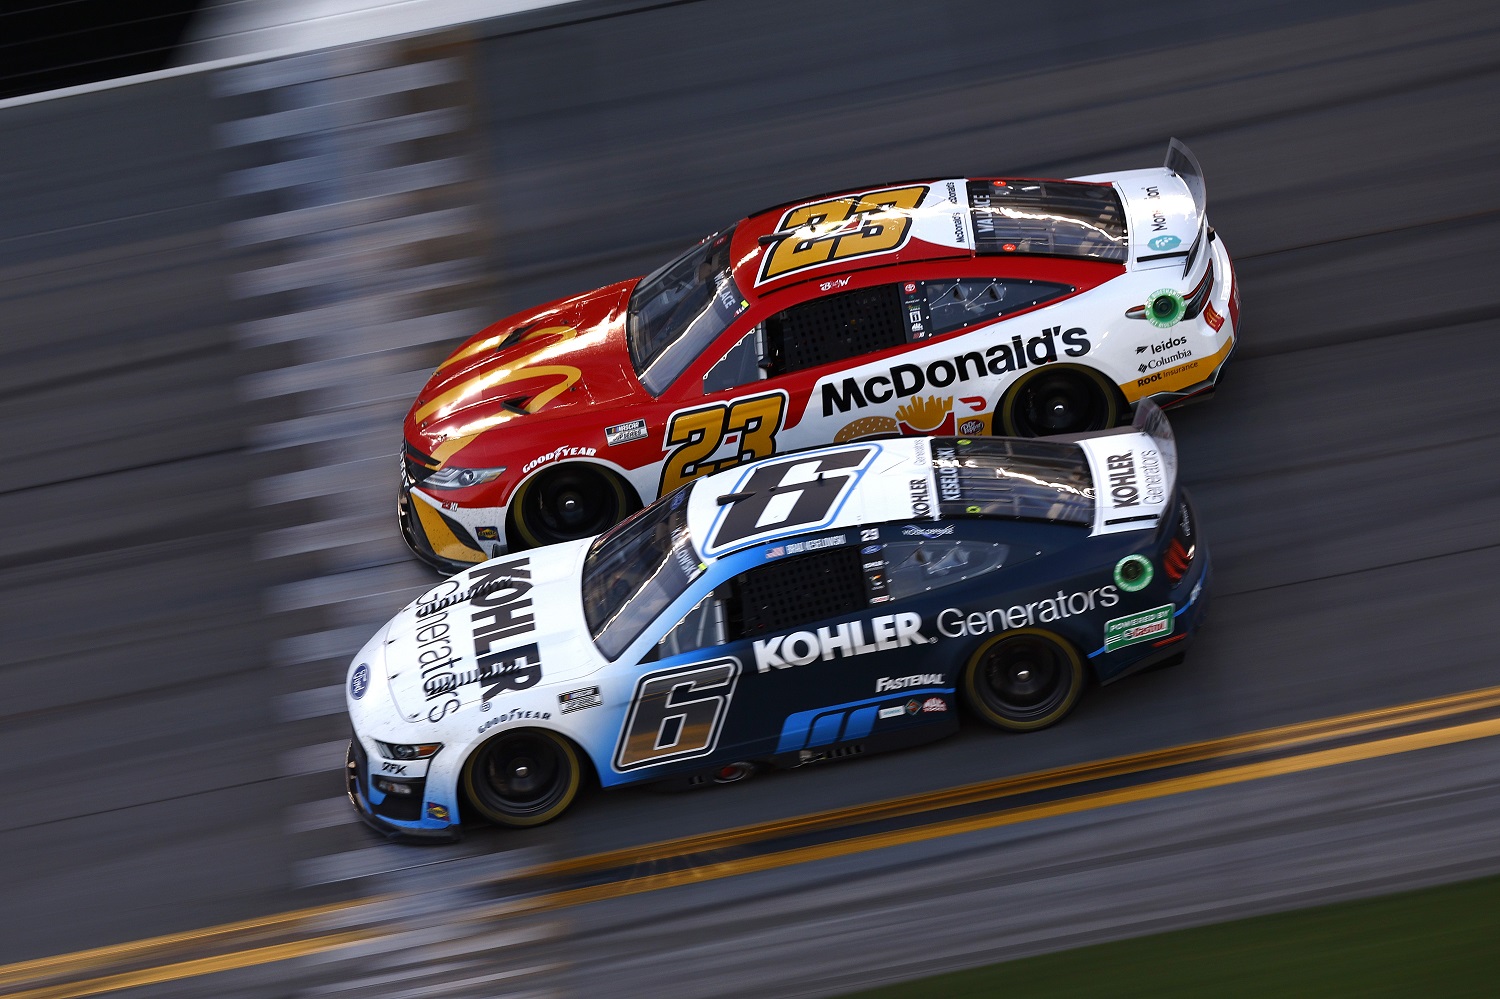 Brad Keselowski, driver of the No. 6 Ford, and Bubba Wallace, driver of the No. 23 Toyota, race during the NASCAR Daytona 500 at Daytona International Speedway on Feb. 20, 2022. | Jared C. Tilton/Getty Images